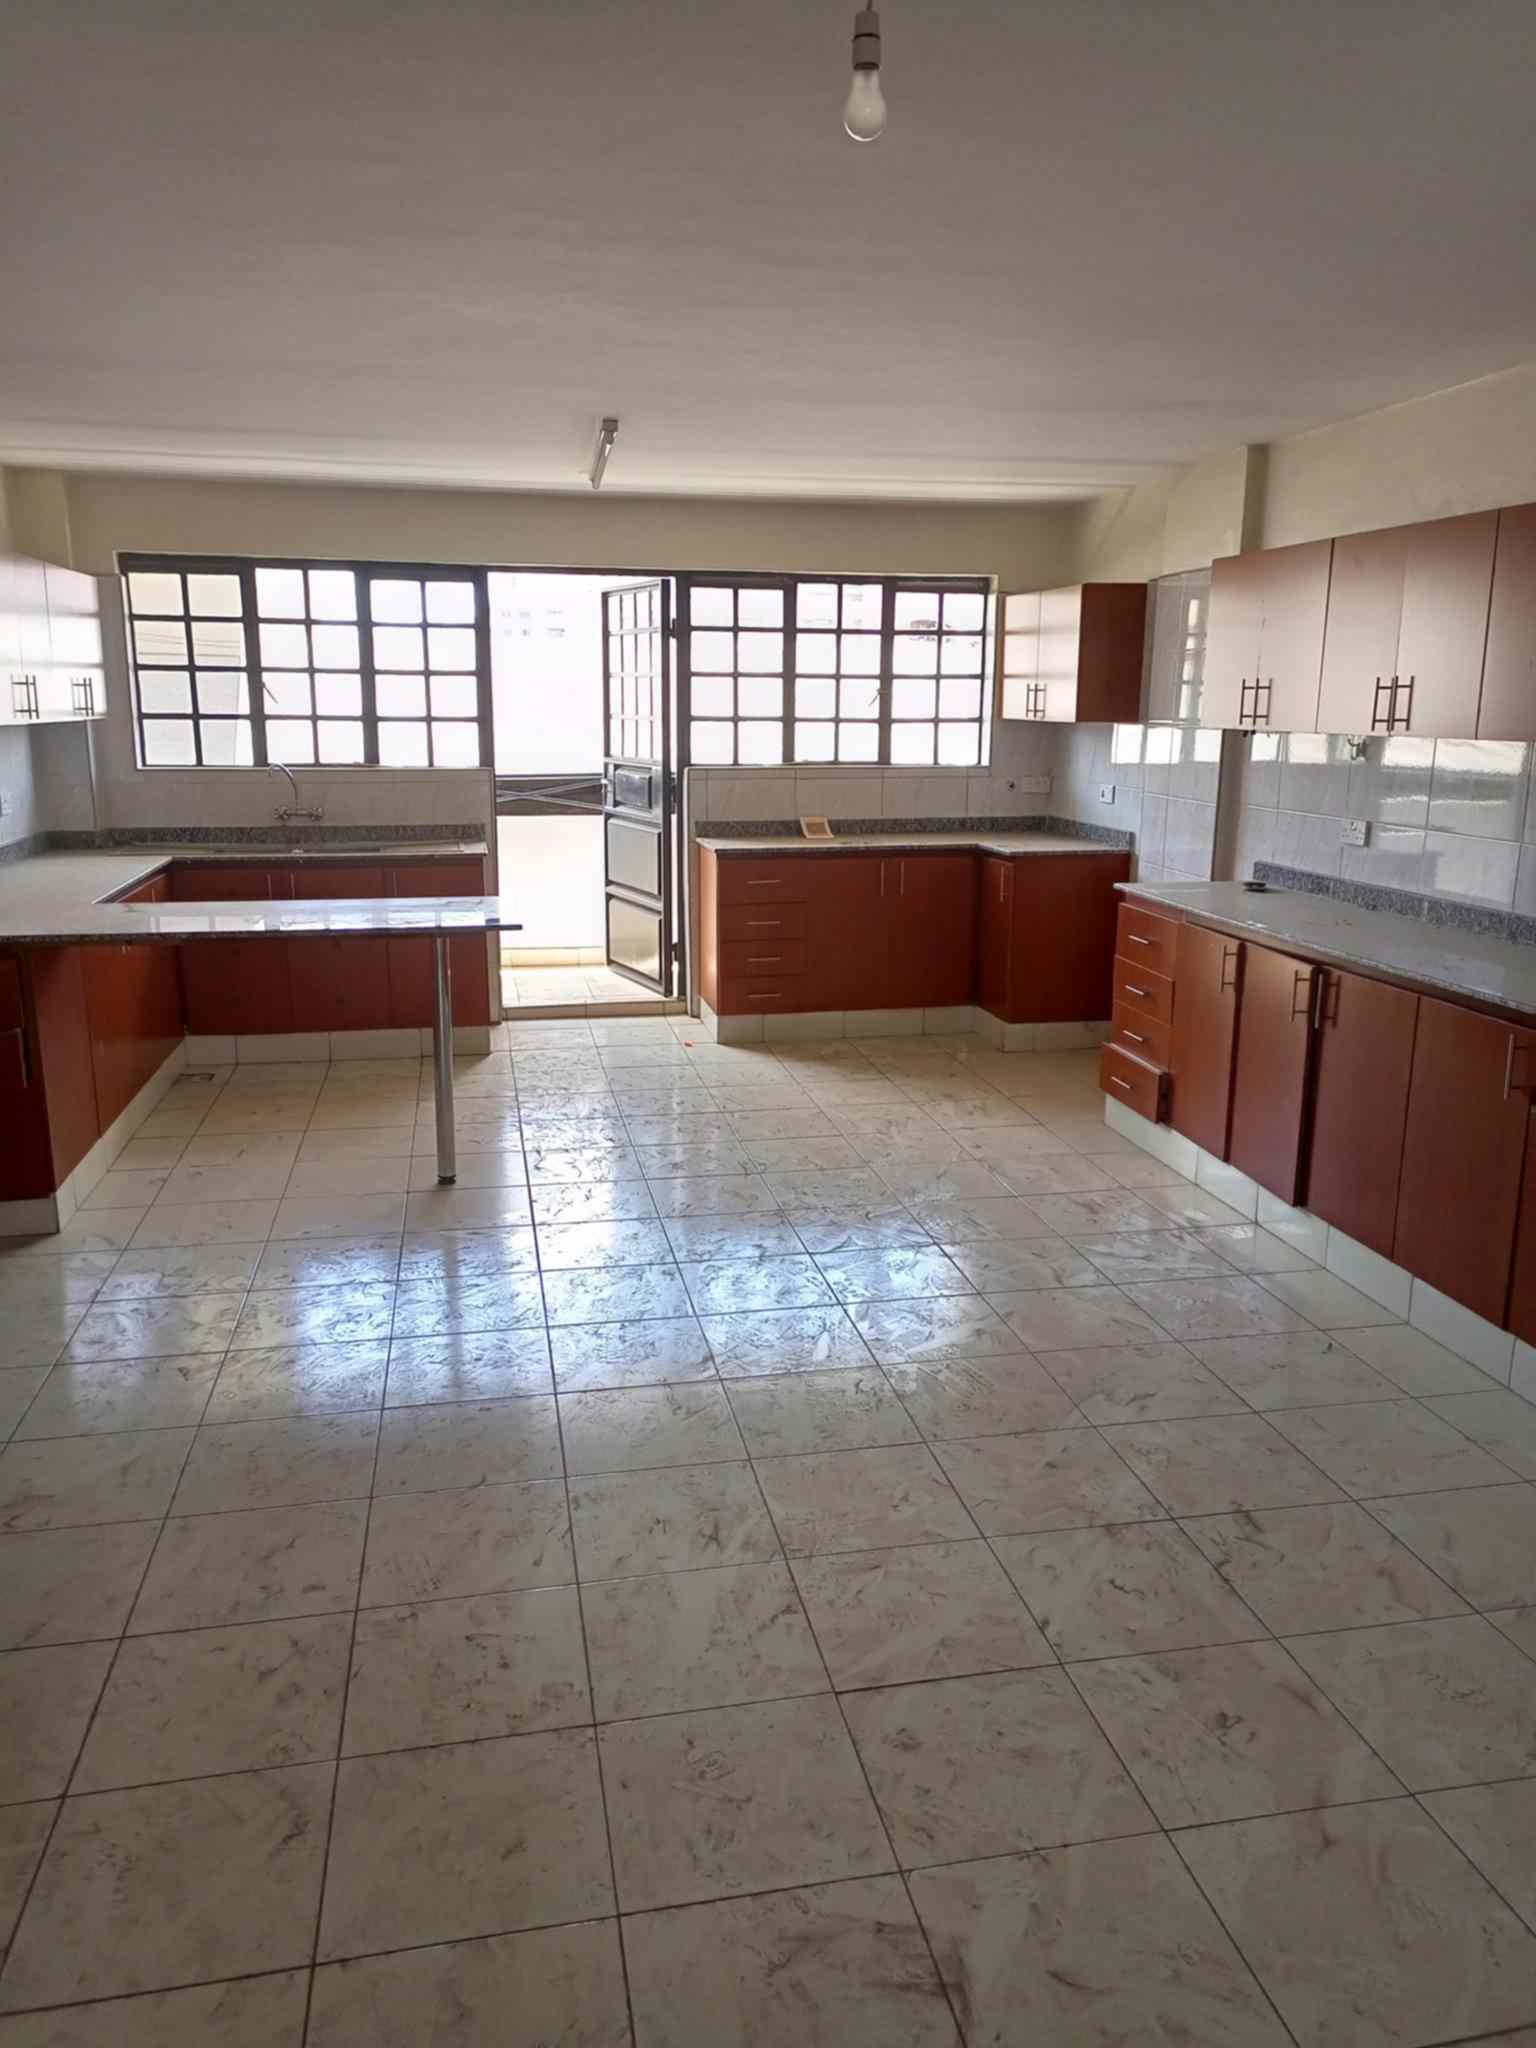 3 bedroom apartment for rent in Ngara near stima plaza